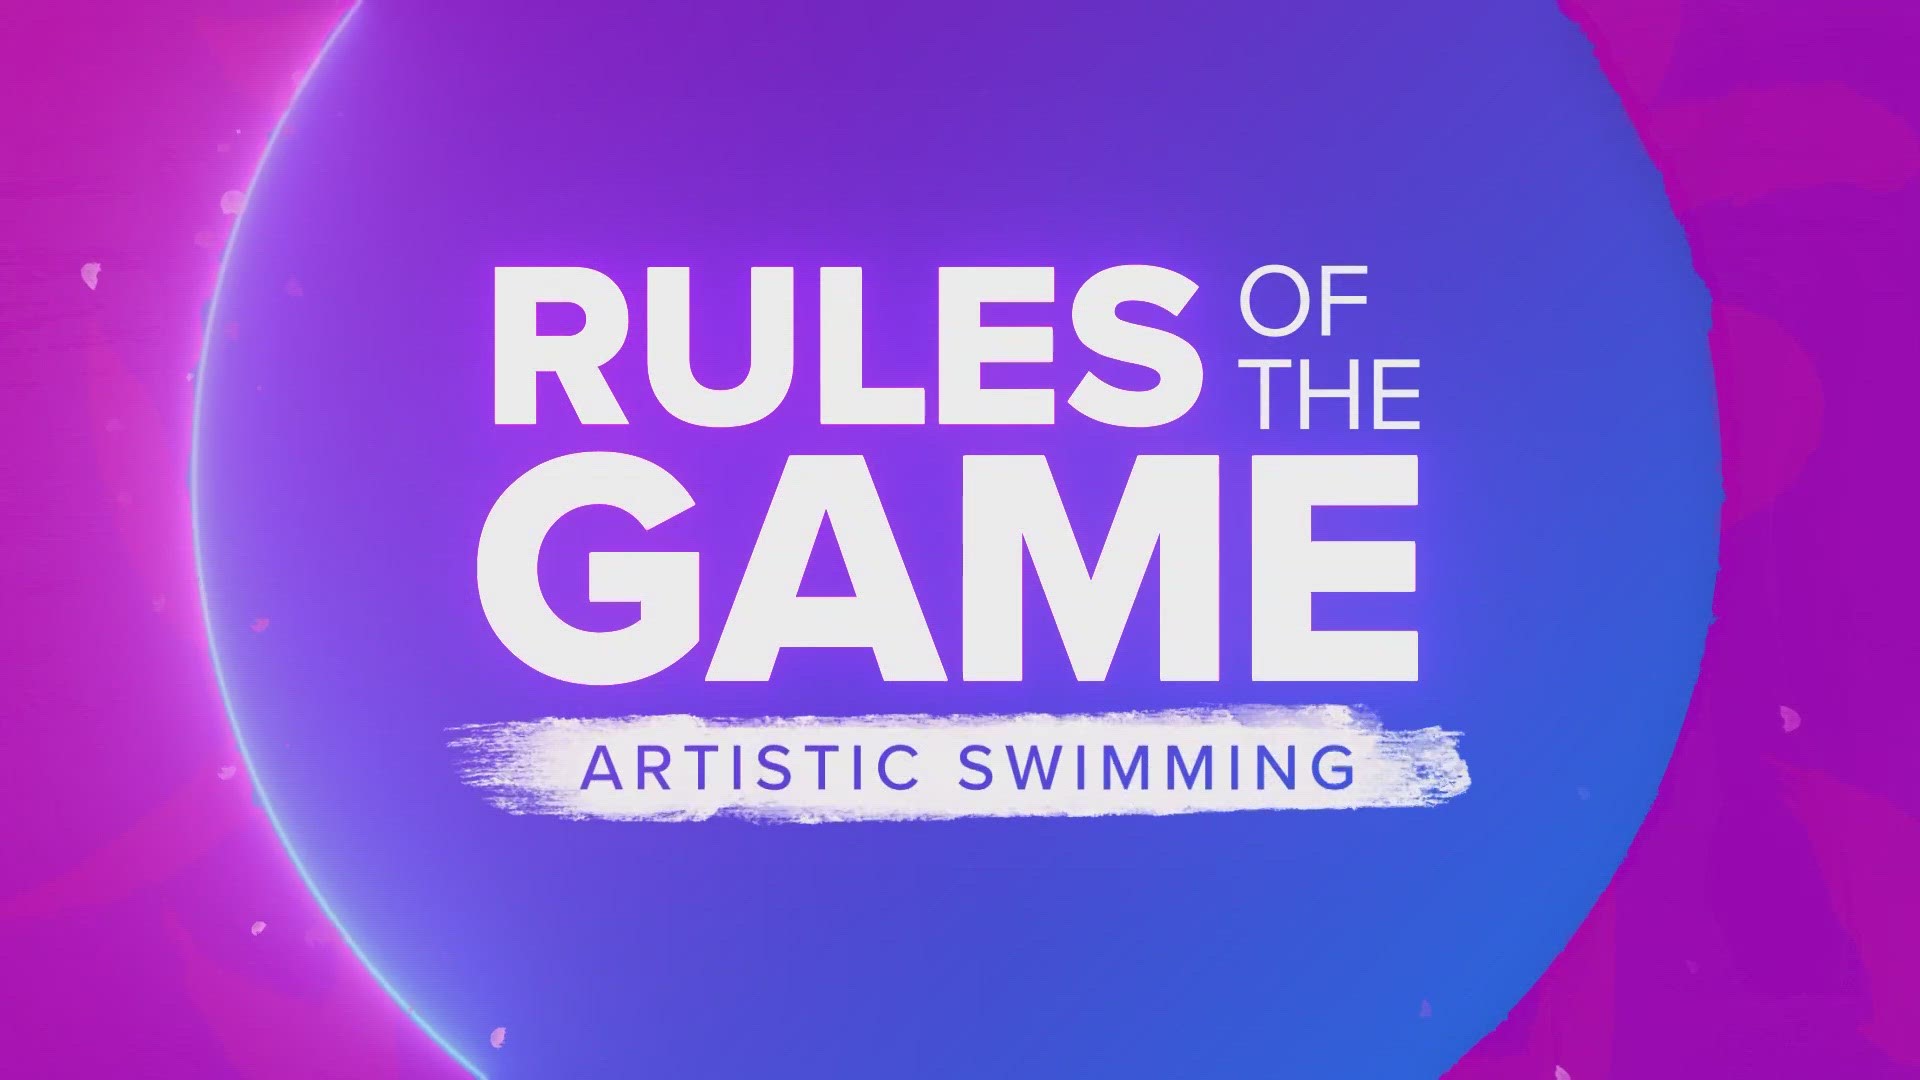 Artistic Swimming is the figure skating of the Summer Olympics. Here's how it works.